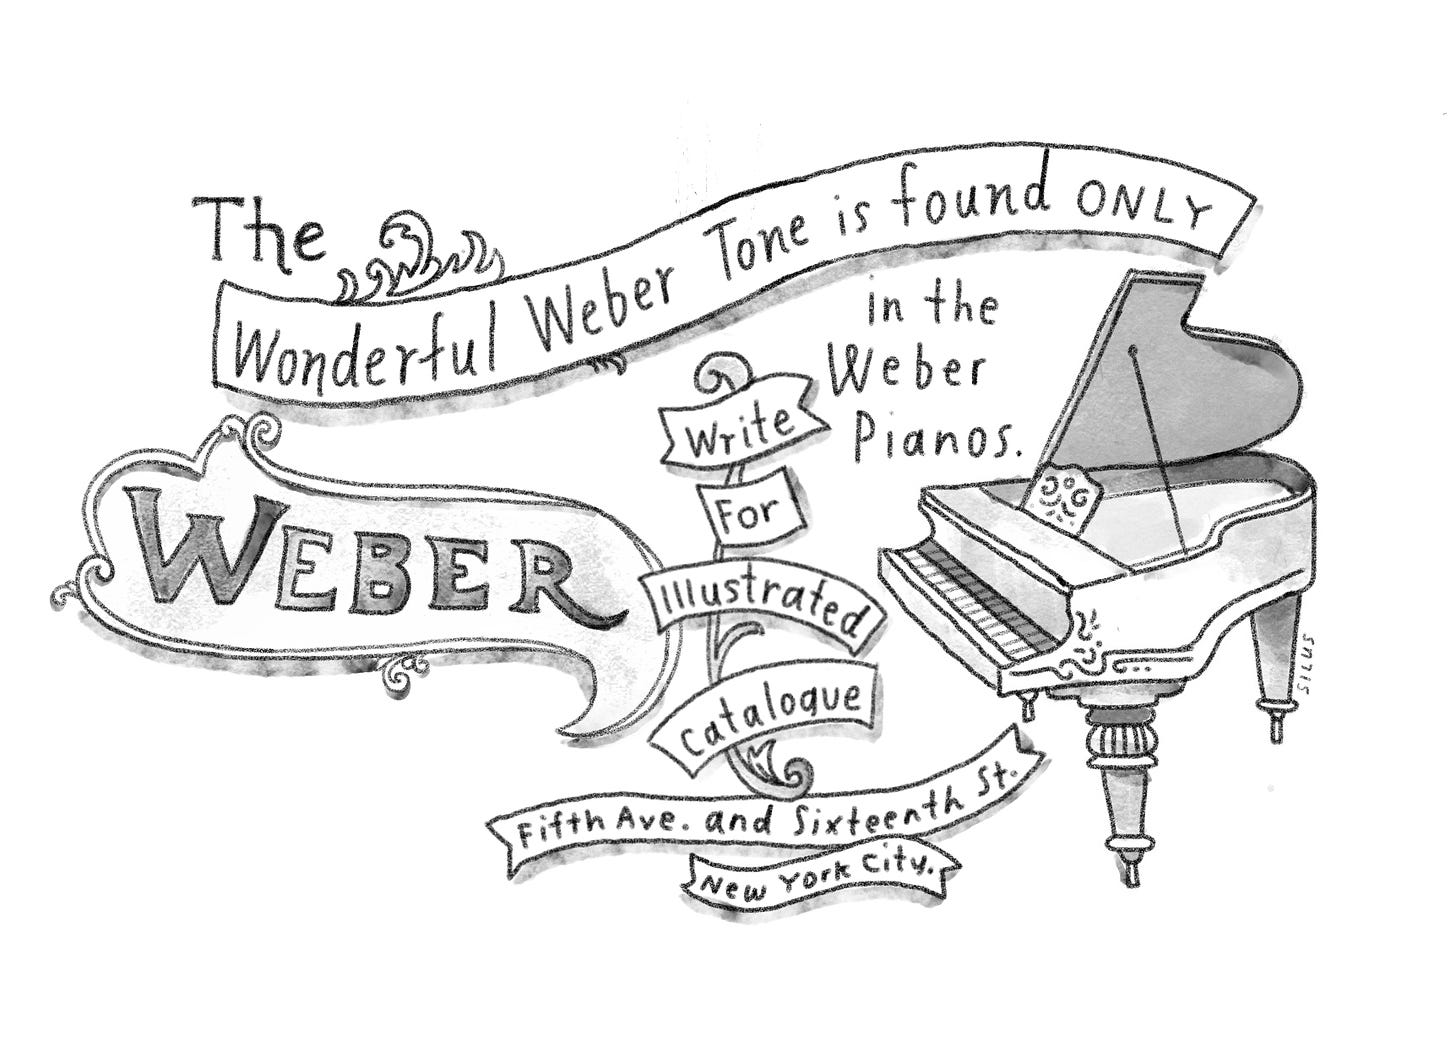 Illustration of the Weber grand piano